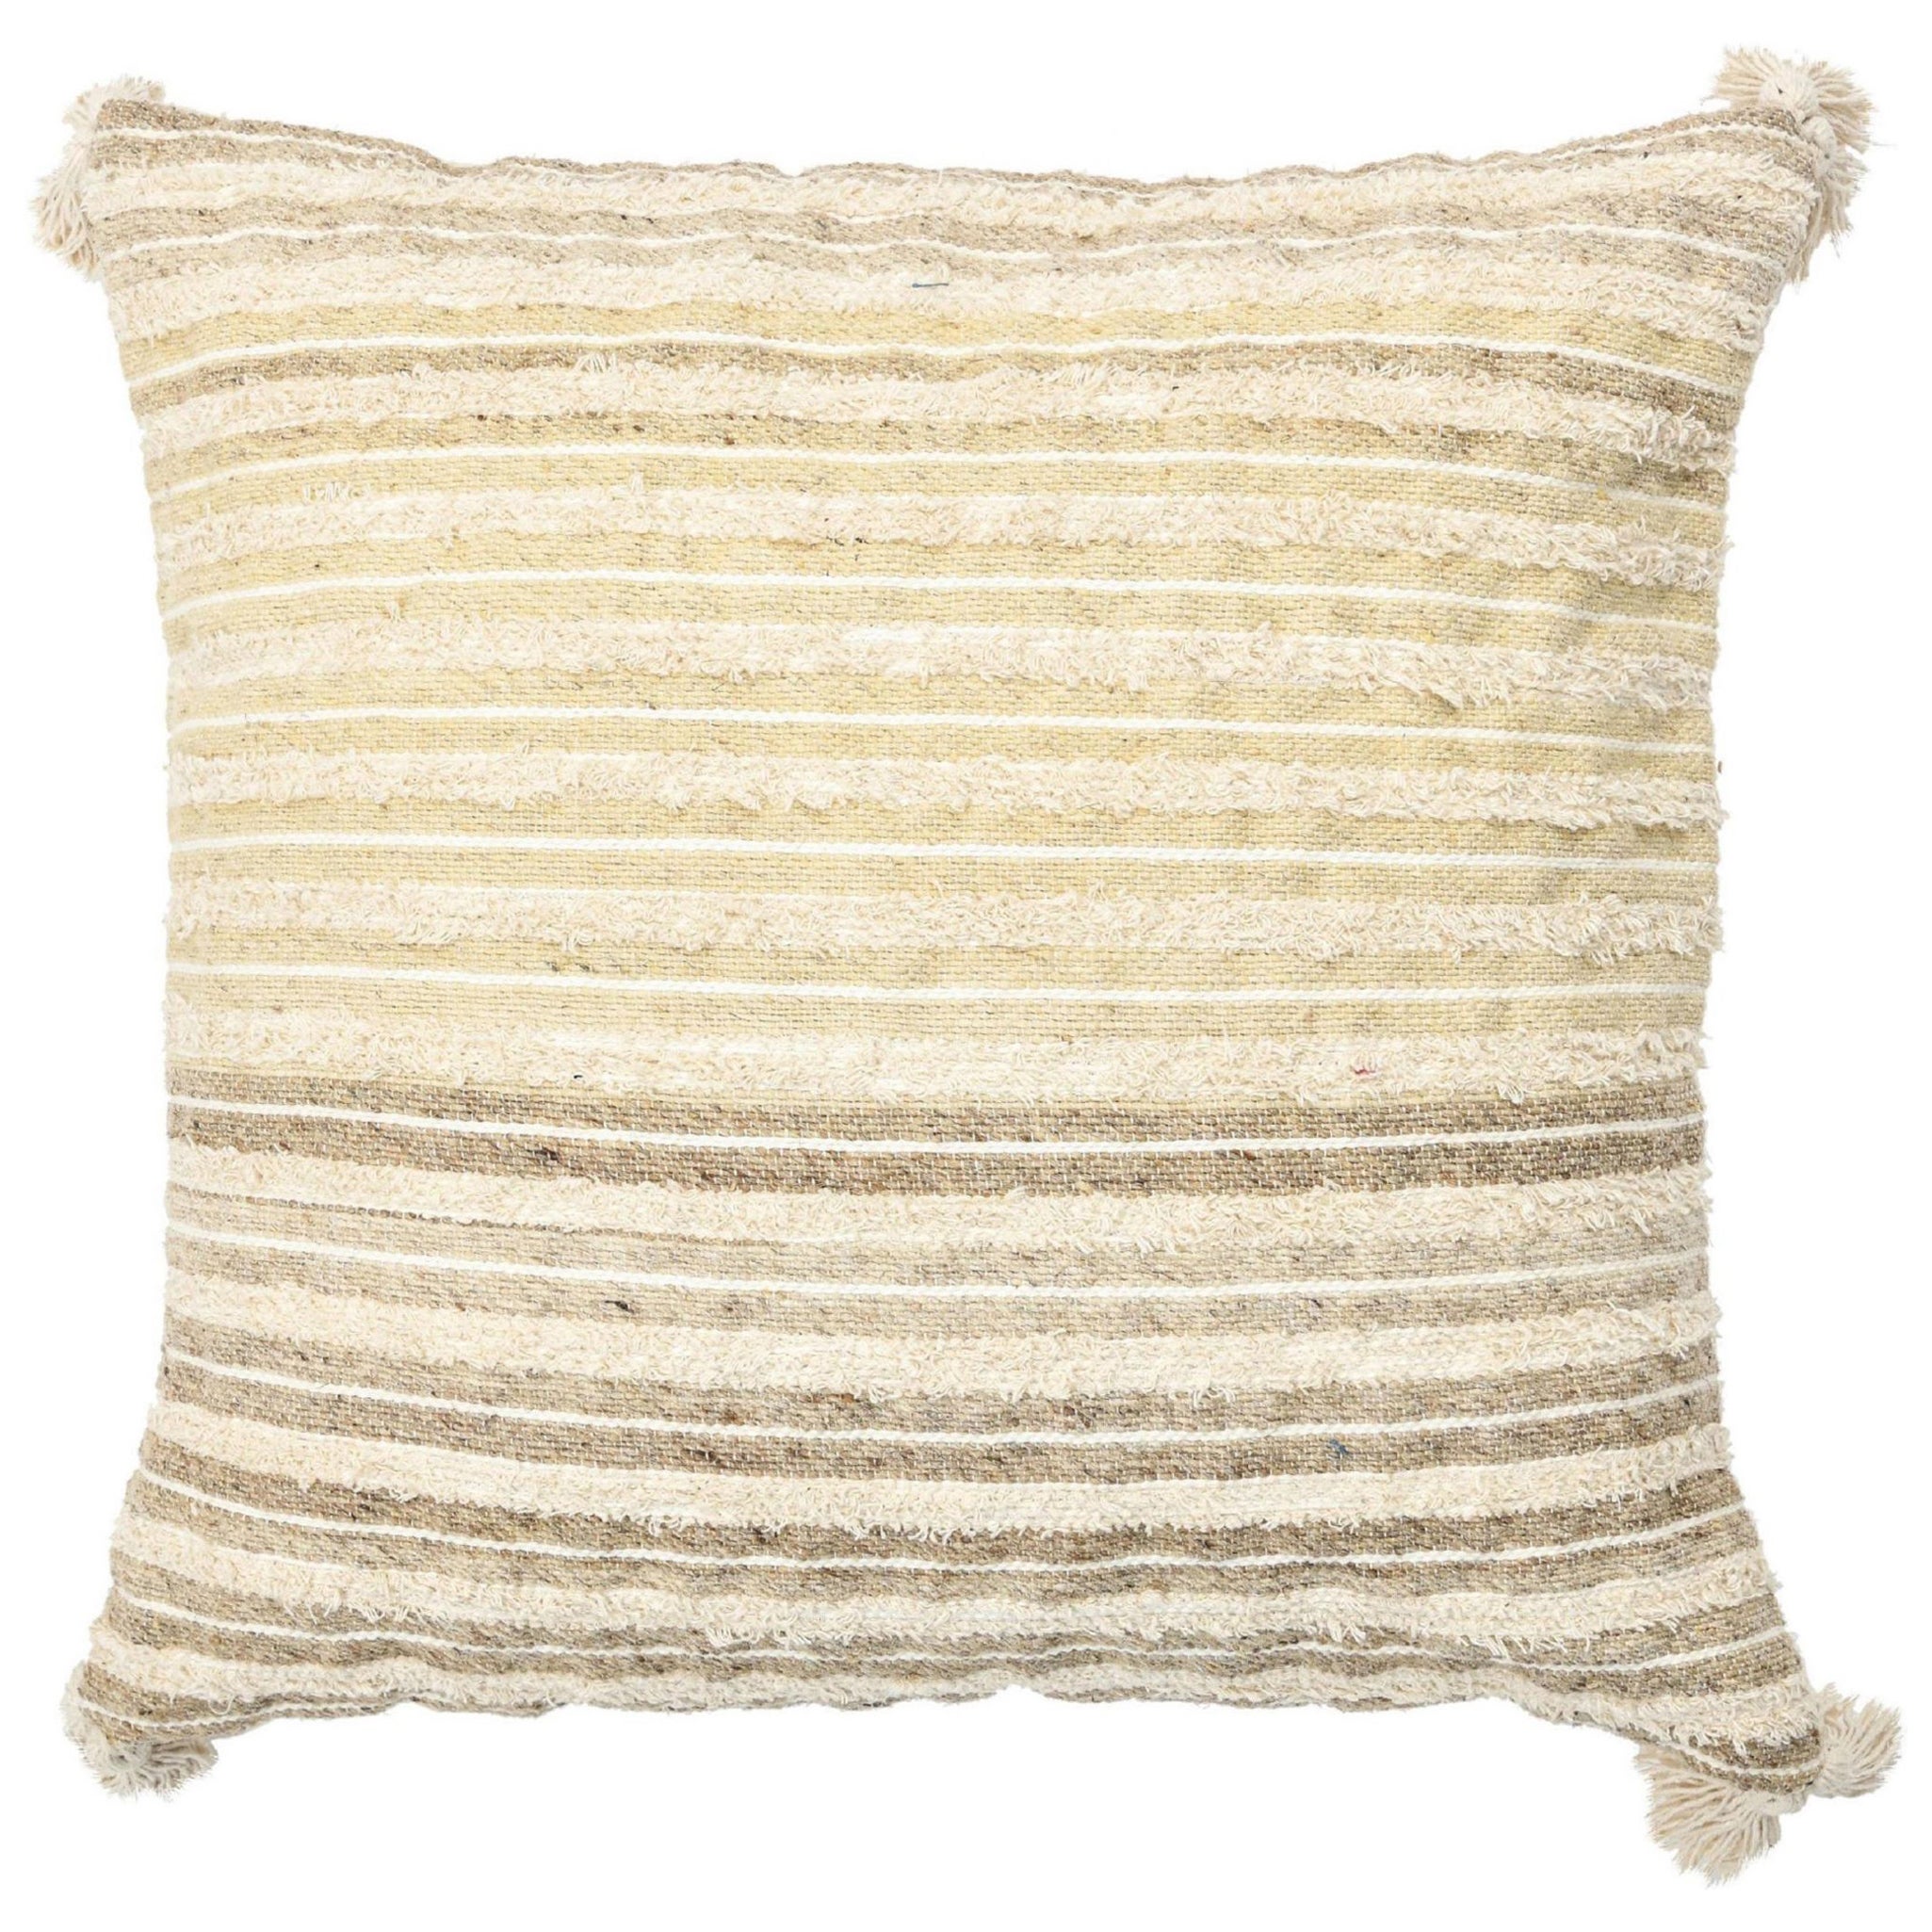 Boho Chic Style Modern Wool and Cotton Pillow In Beige